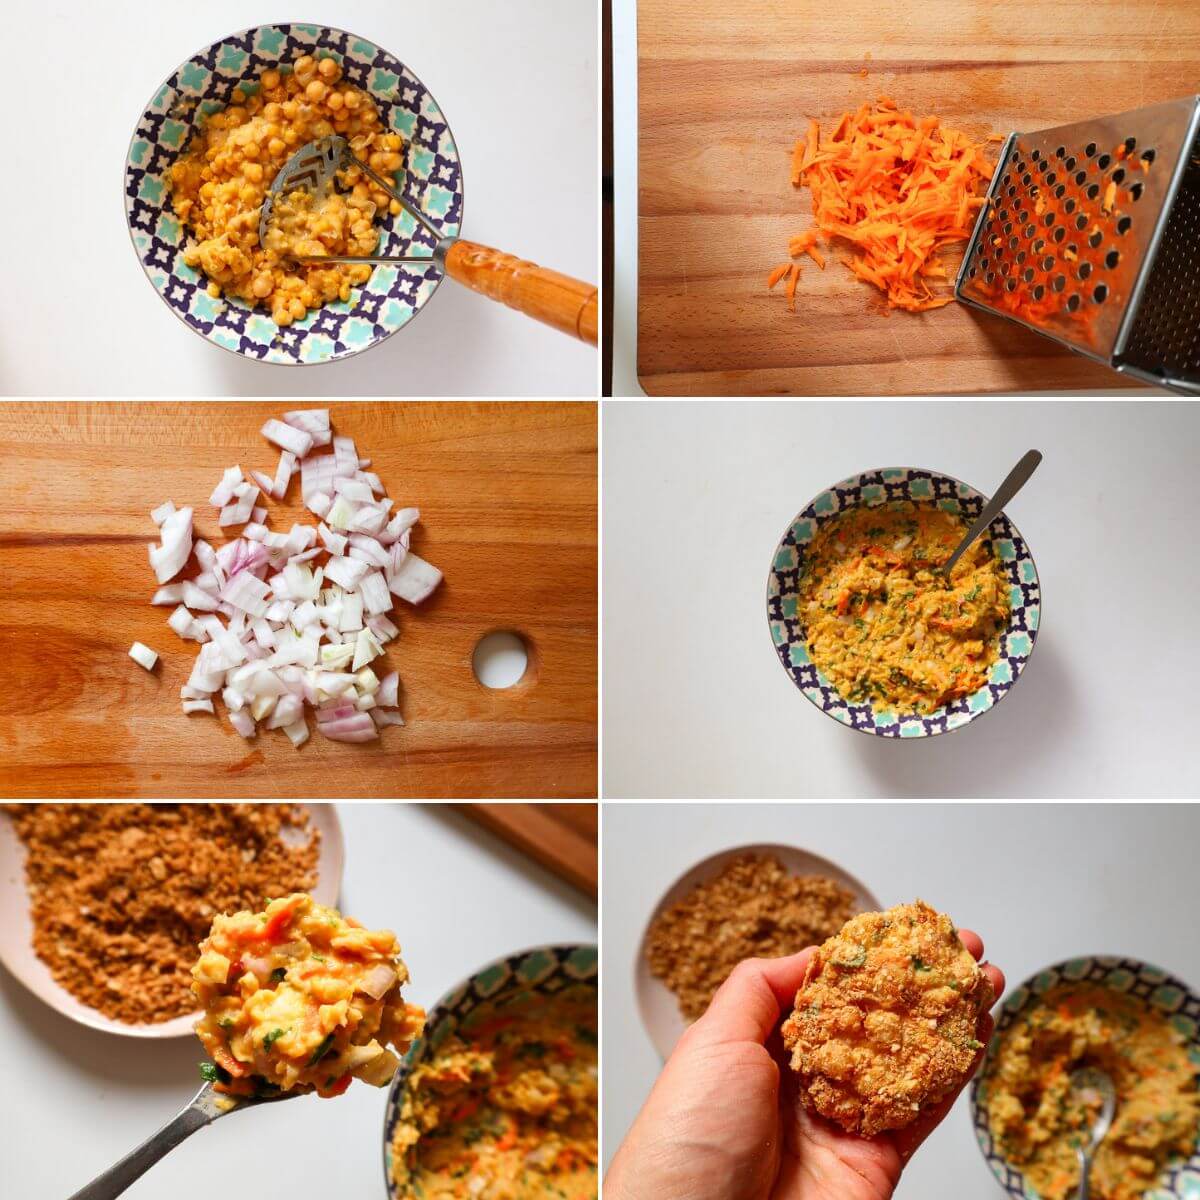 Collage of images showing how to make the recipe.